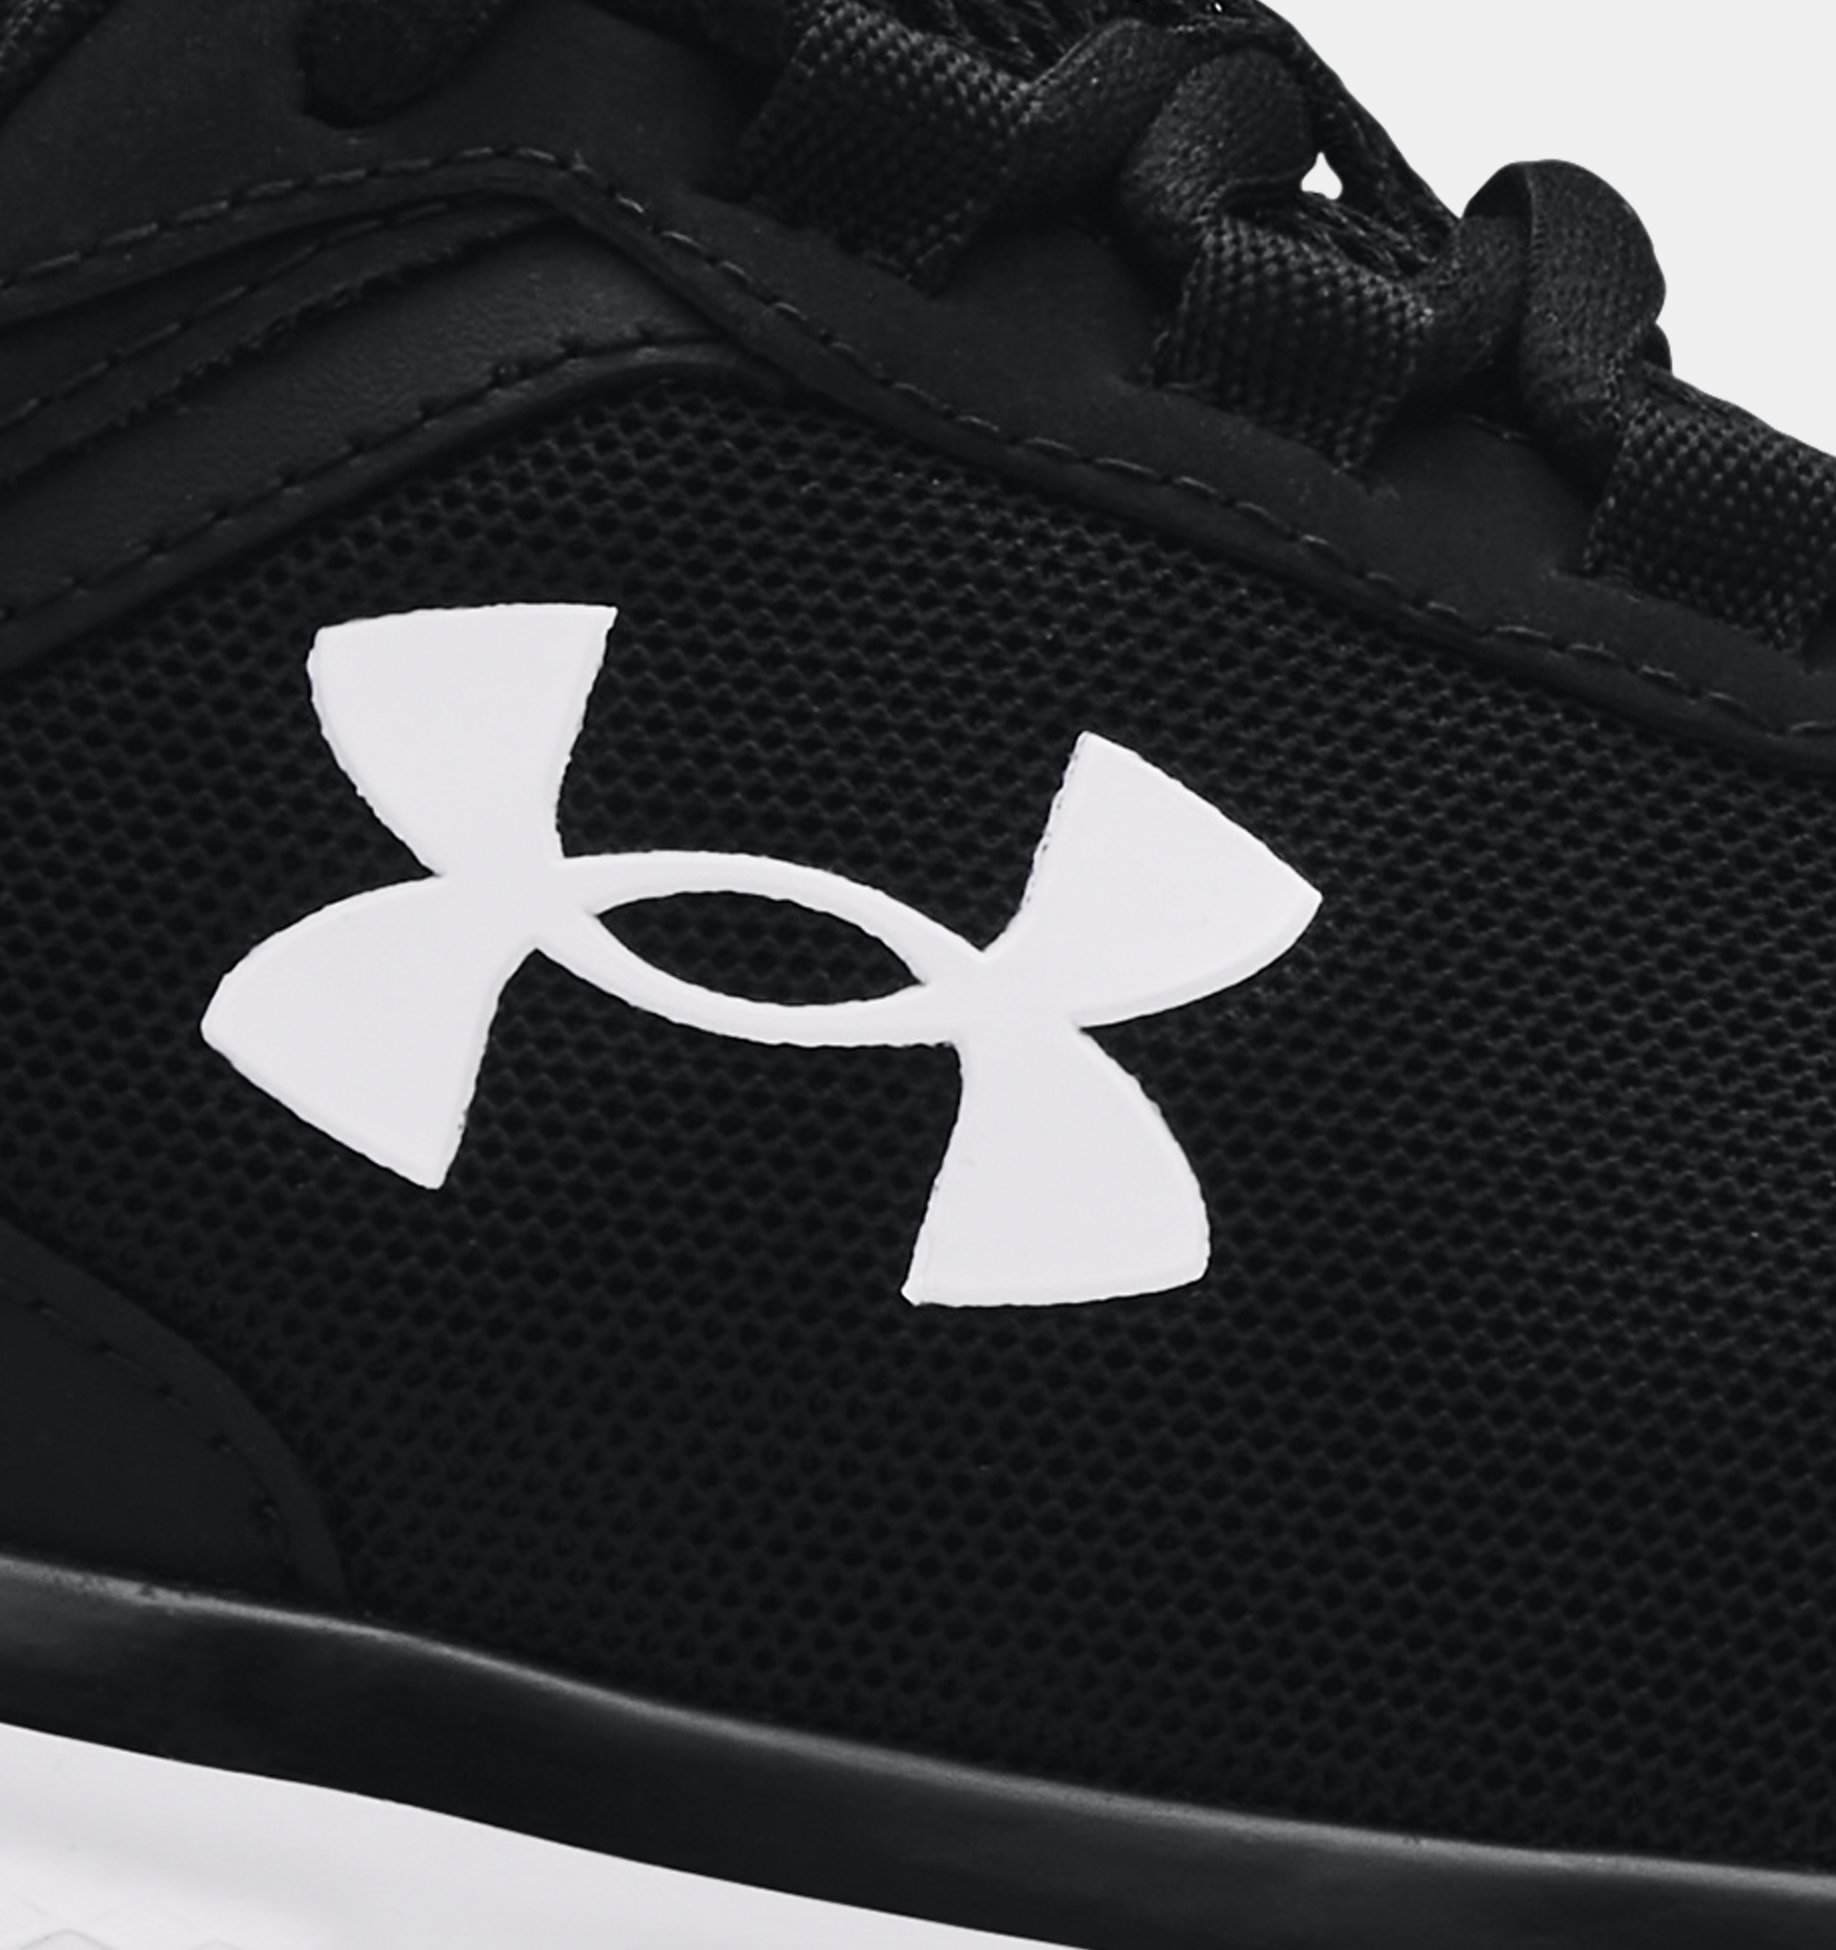 Are Under Armour Hood Shoes For Women? - Shoe Effect